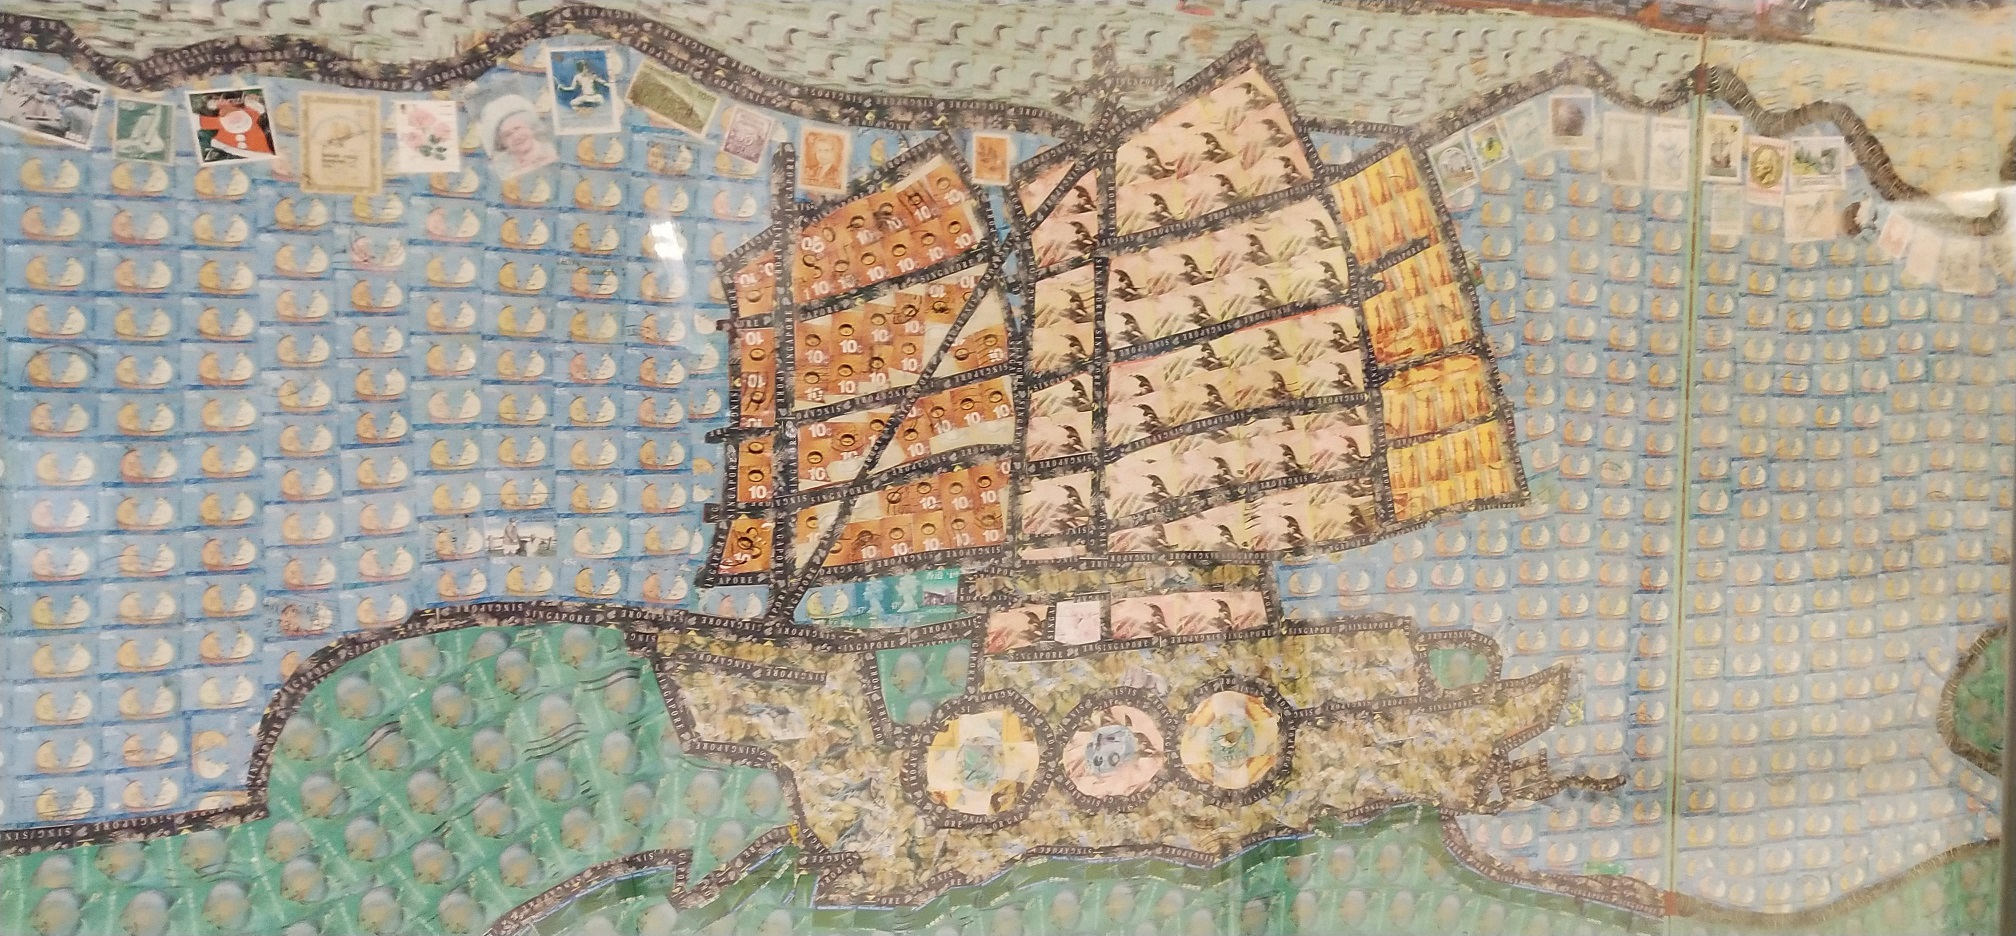 Junk boat with big sail in the mosaic by stamp